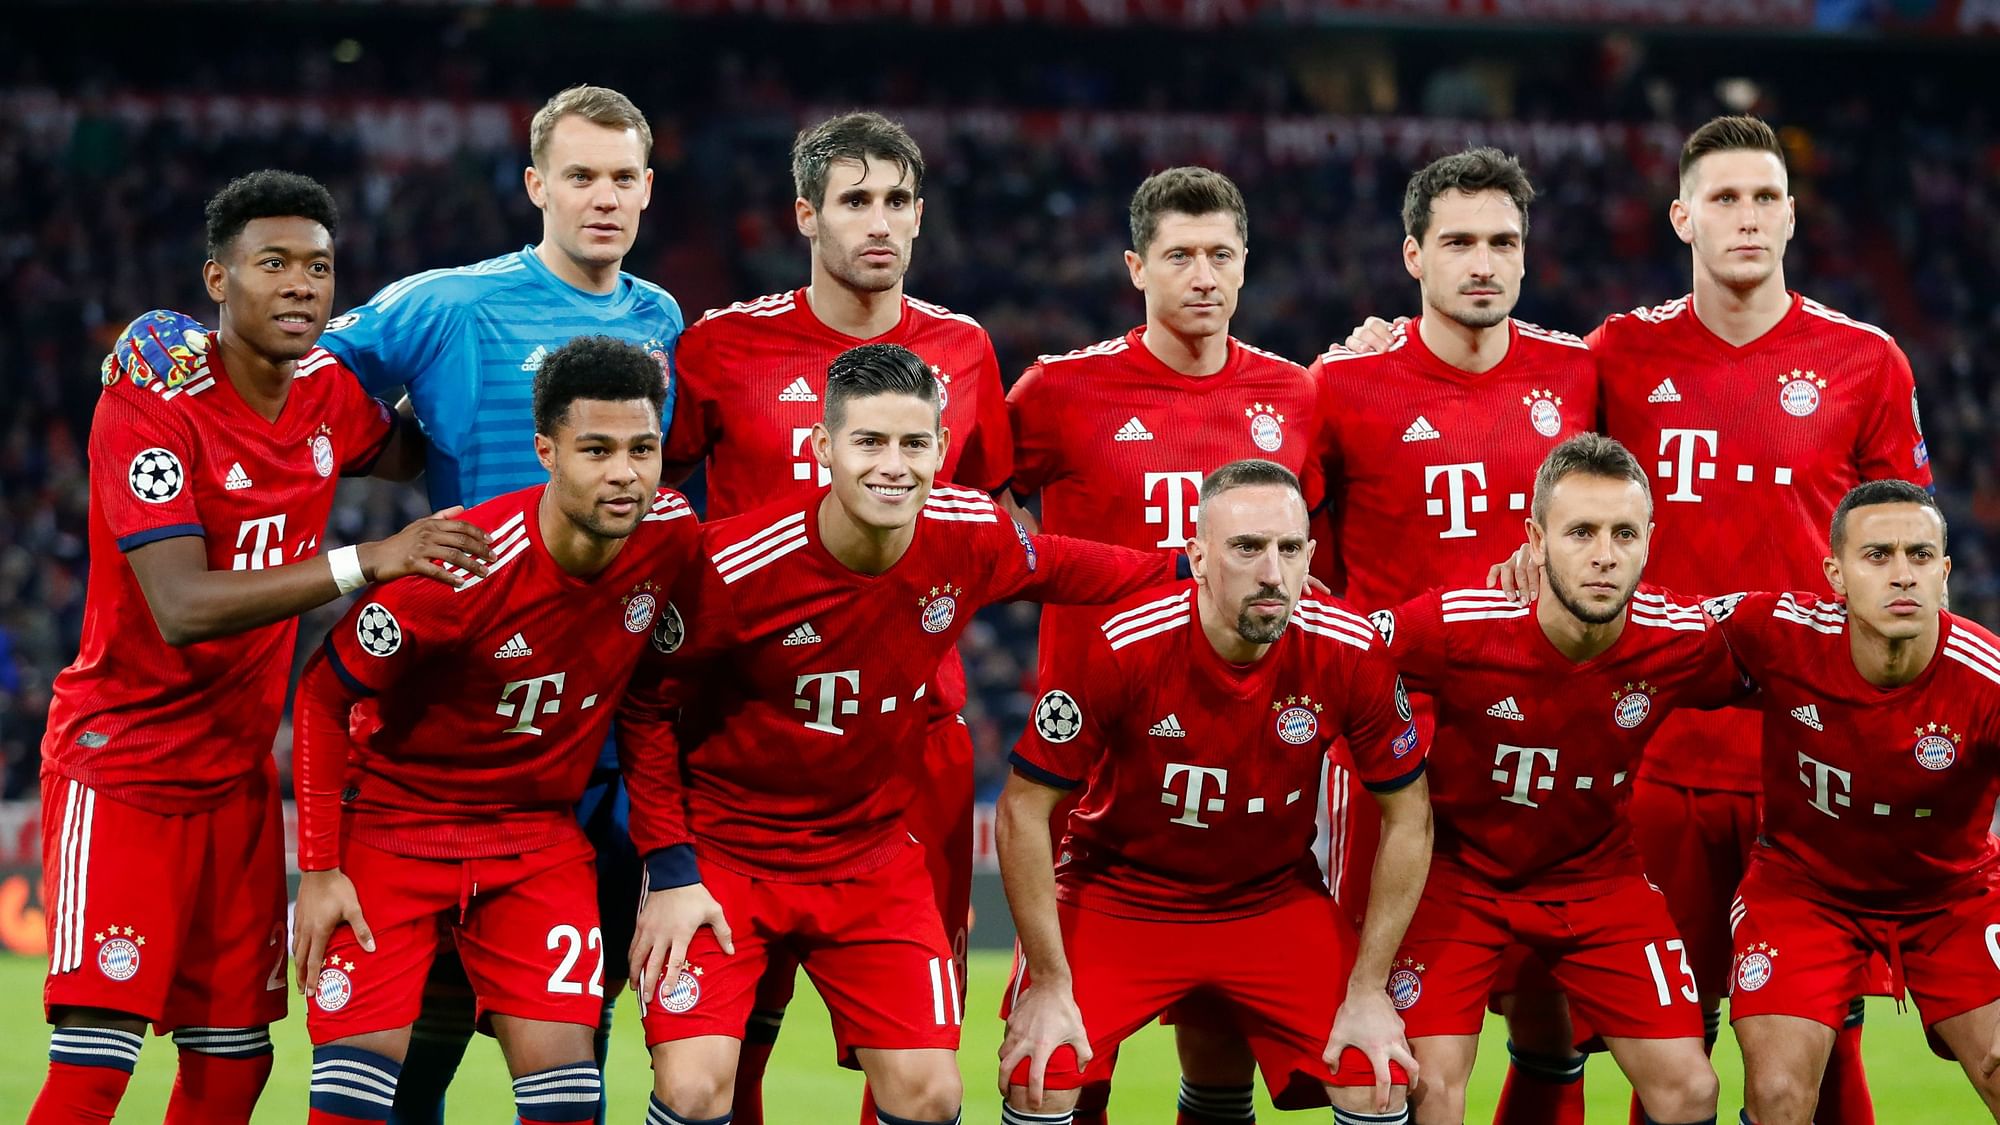 Bayenr Munich’s players pose for a team picture before the Champions League round of 16 second leg soccer match between Bayern Munich and Liverpool at the Allianz Arena, in Munich, Germany, Wednesday, March 13, 2019.&nbsp;